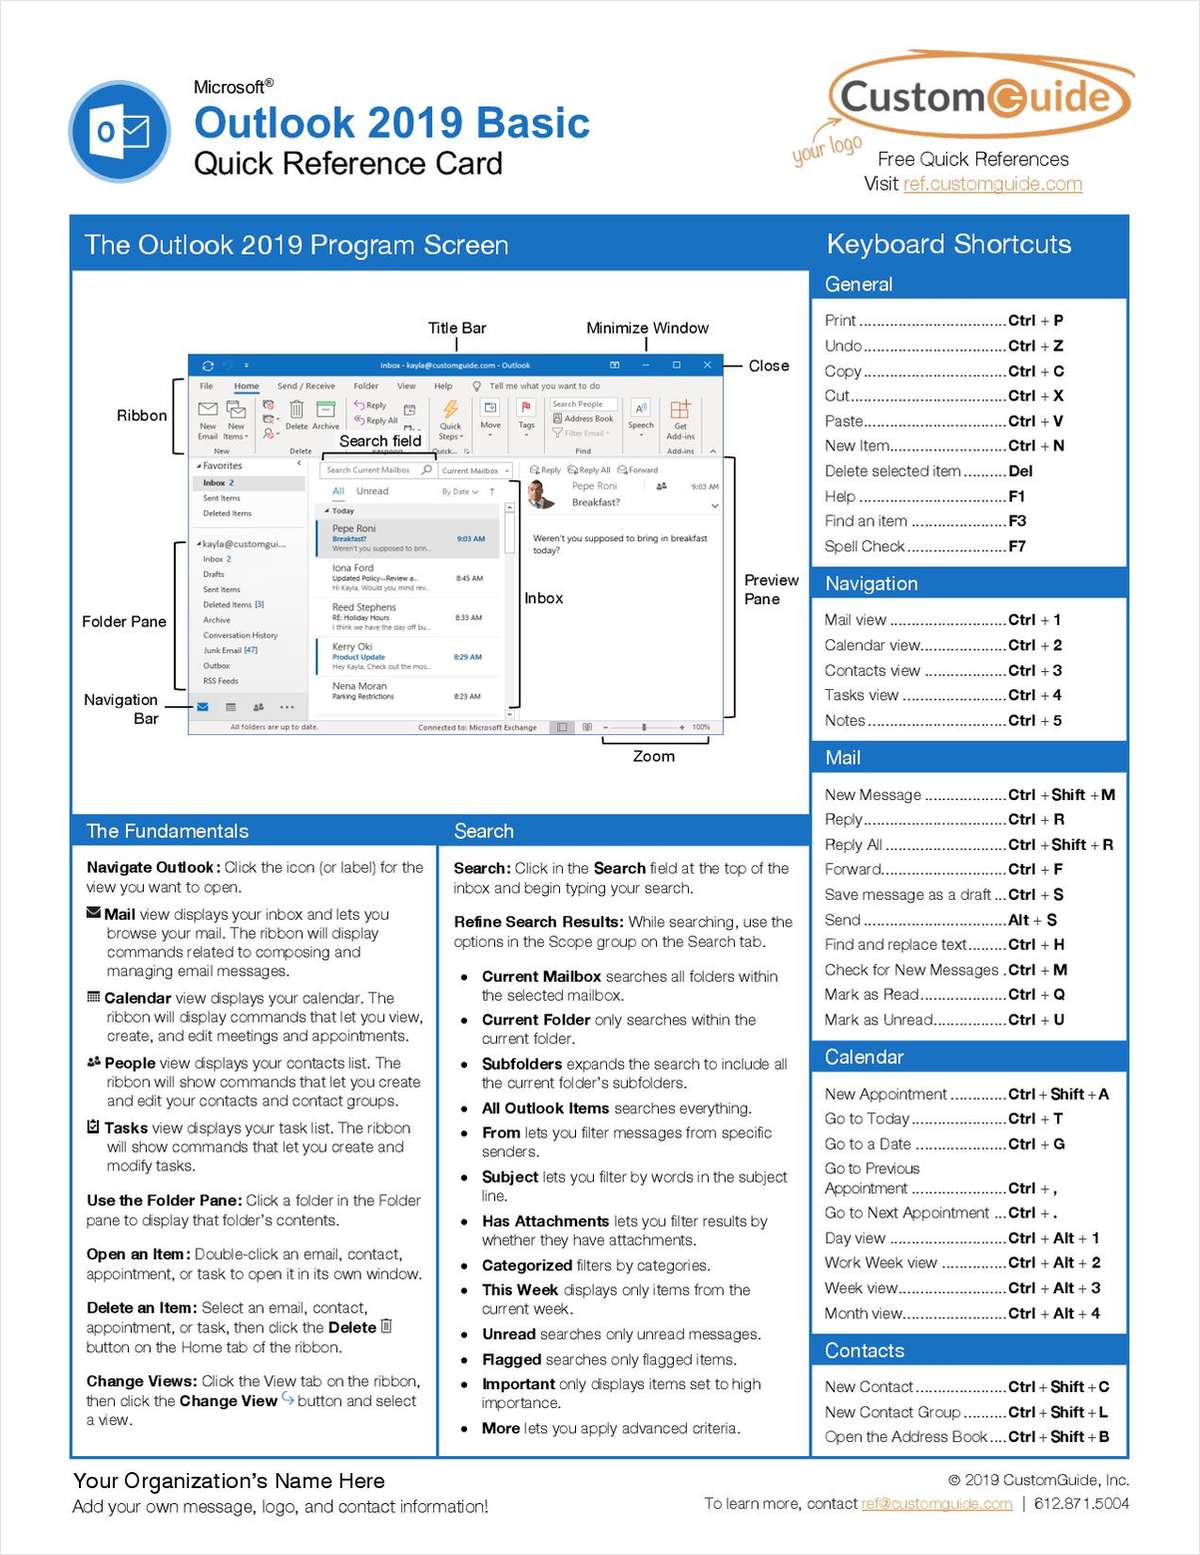 Microsoft Outlook 2019 Basic - Quick Reference Card